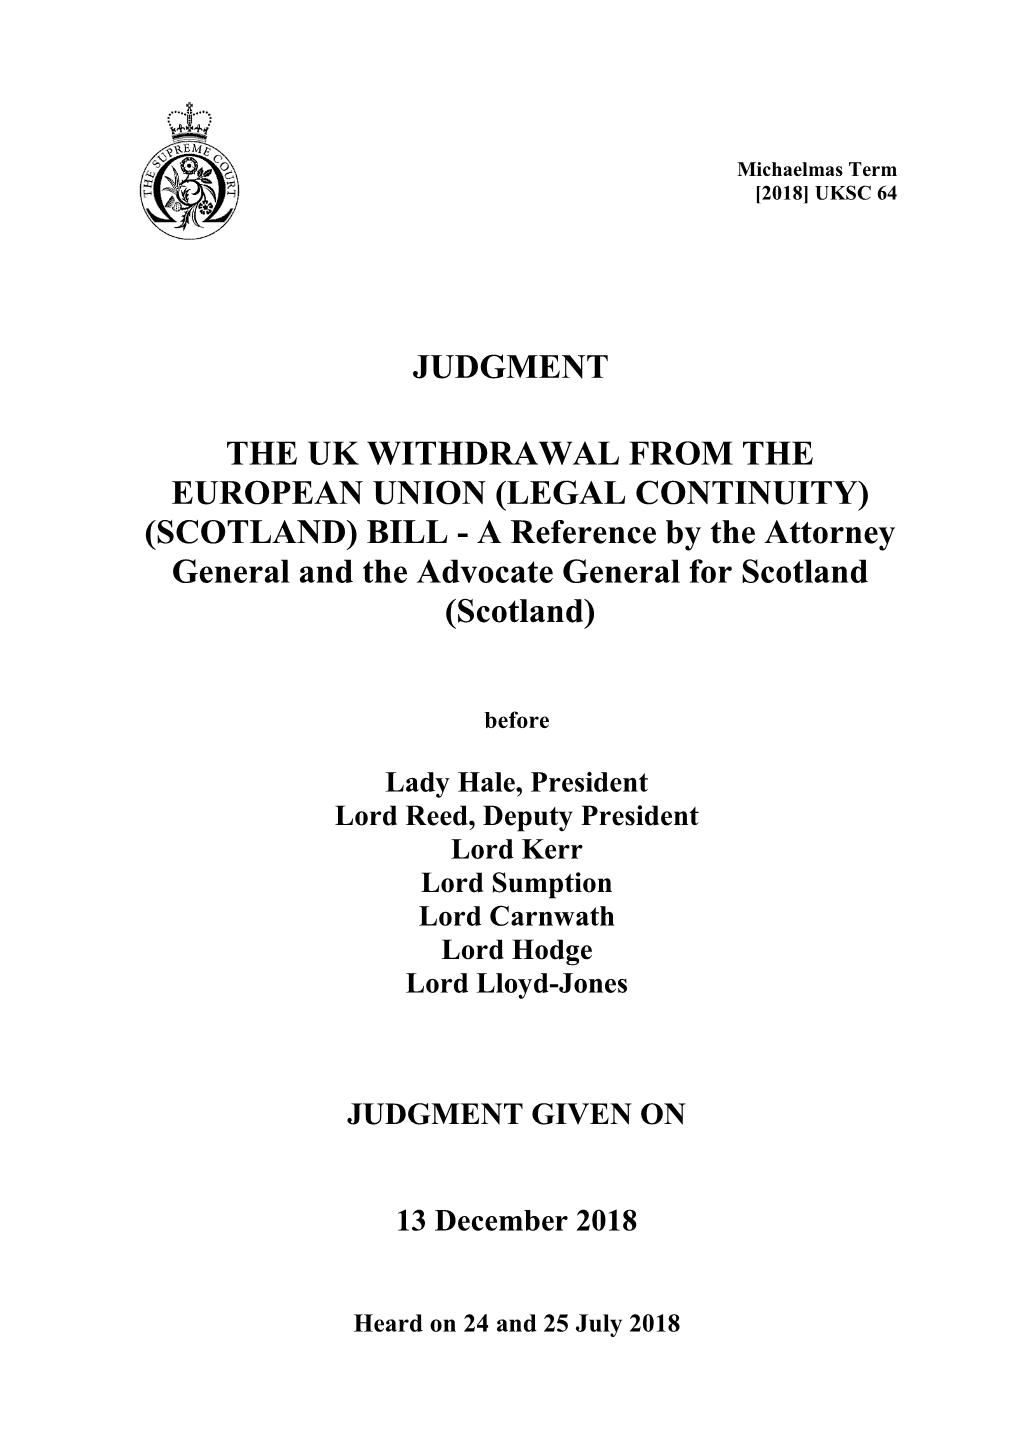 UK WITHDRAWAL from the EUROPEAN UNION (LEGAL CONTINUITY) (SCOTLAND) BILL - a Reference by the Attorney General and the Advocate General for Scotland (Scotland)